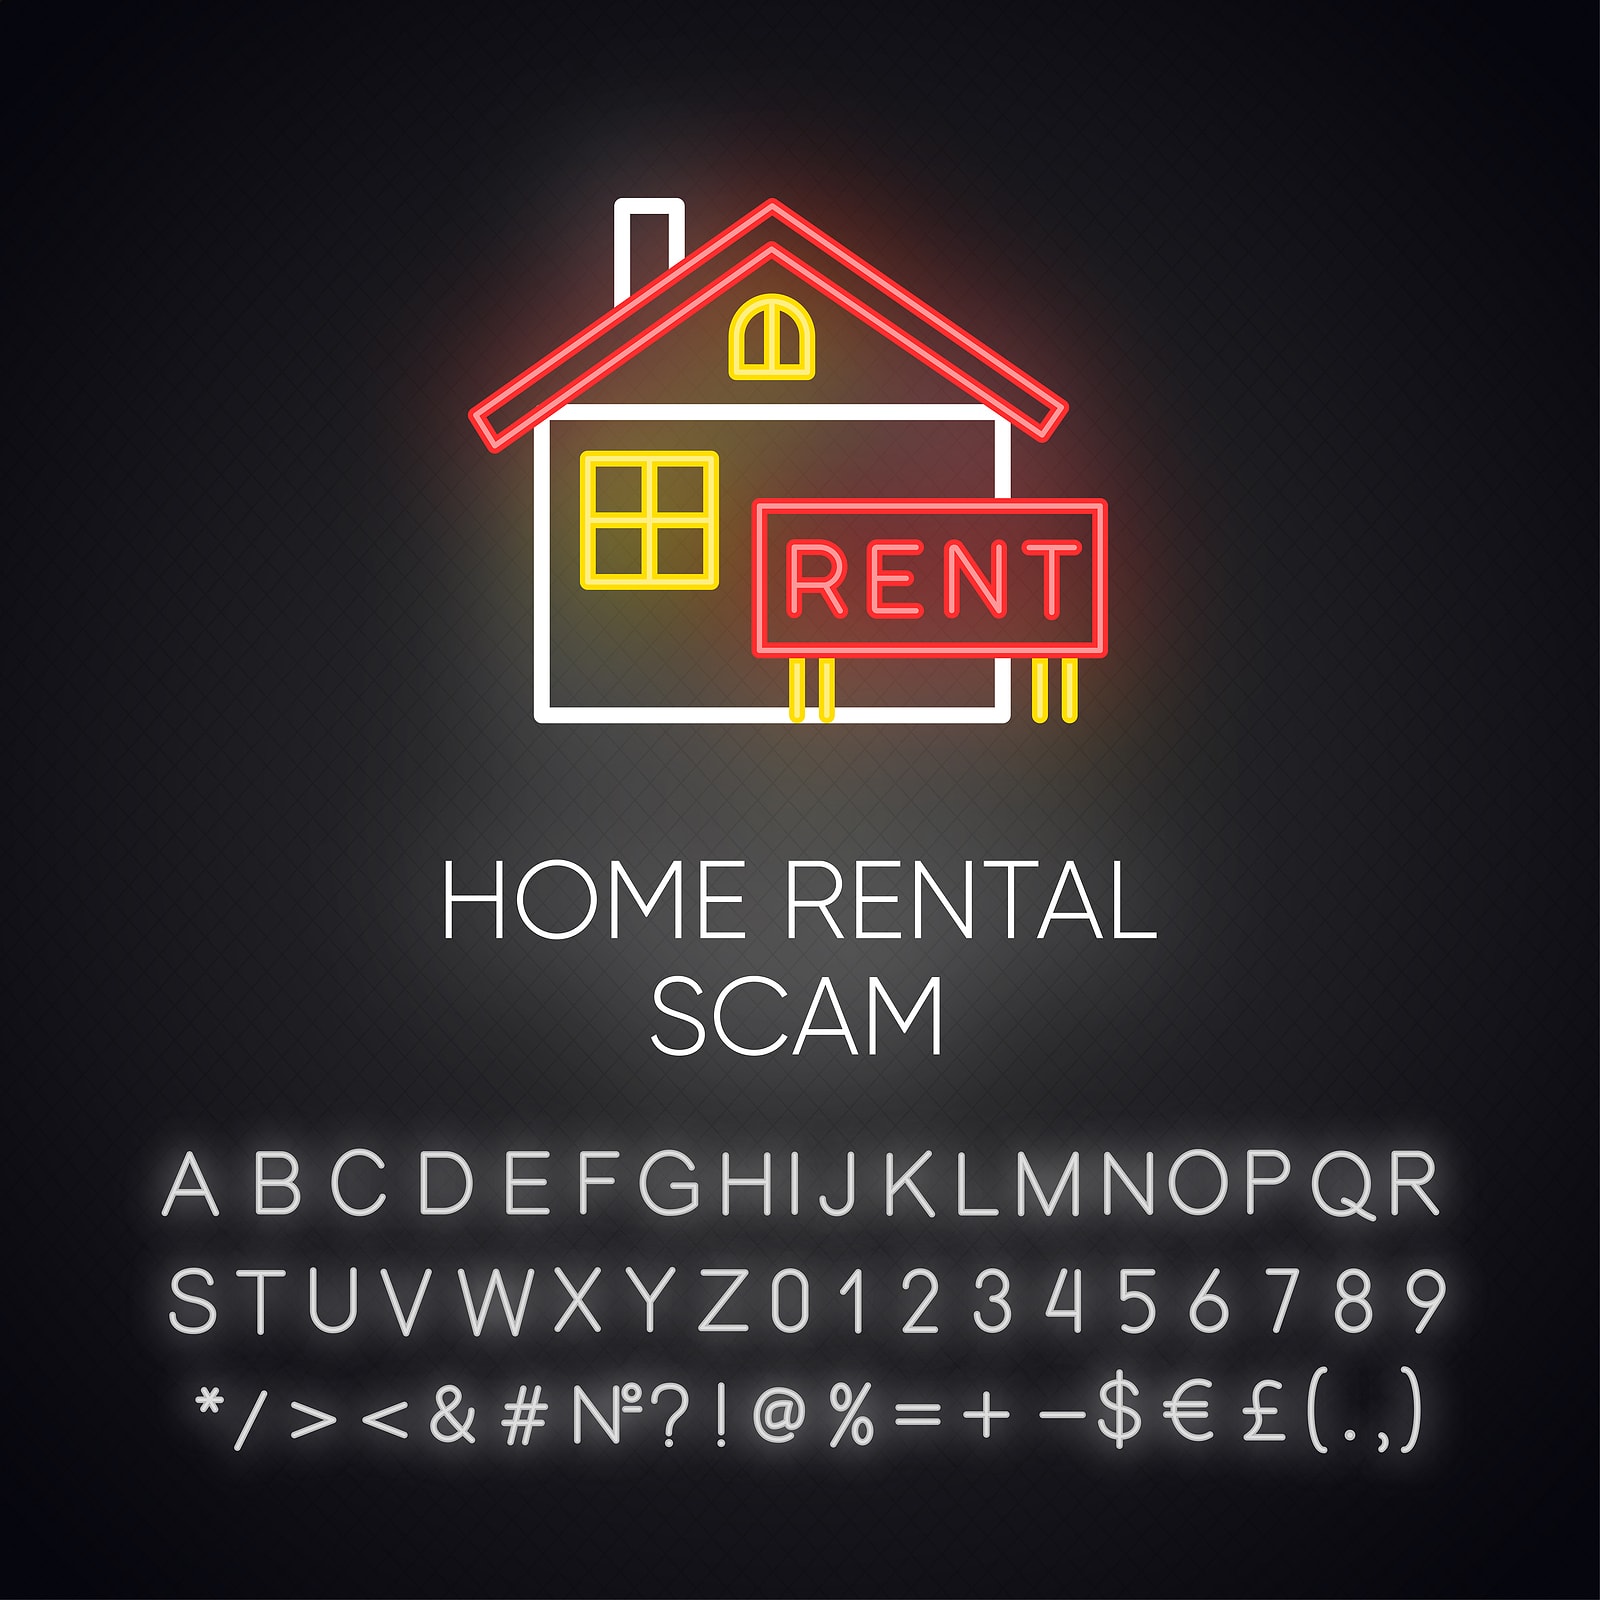 Rental Scams – Update from Citysearch – June 2019